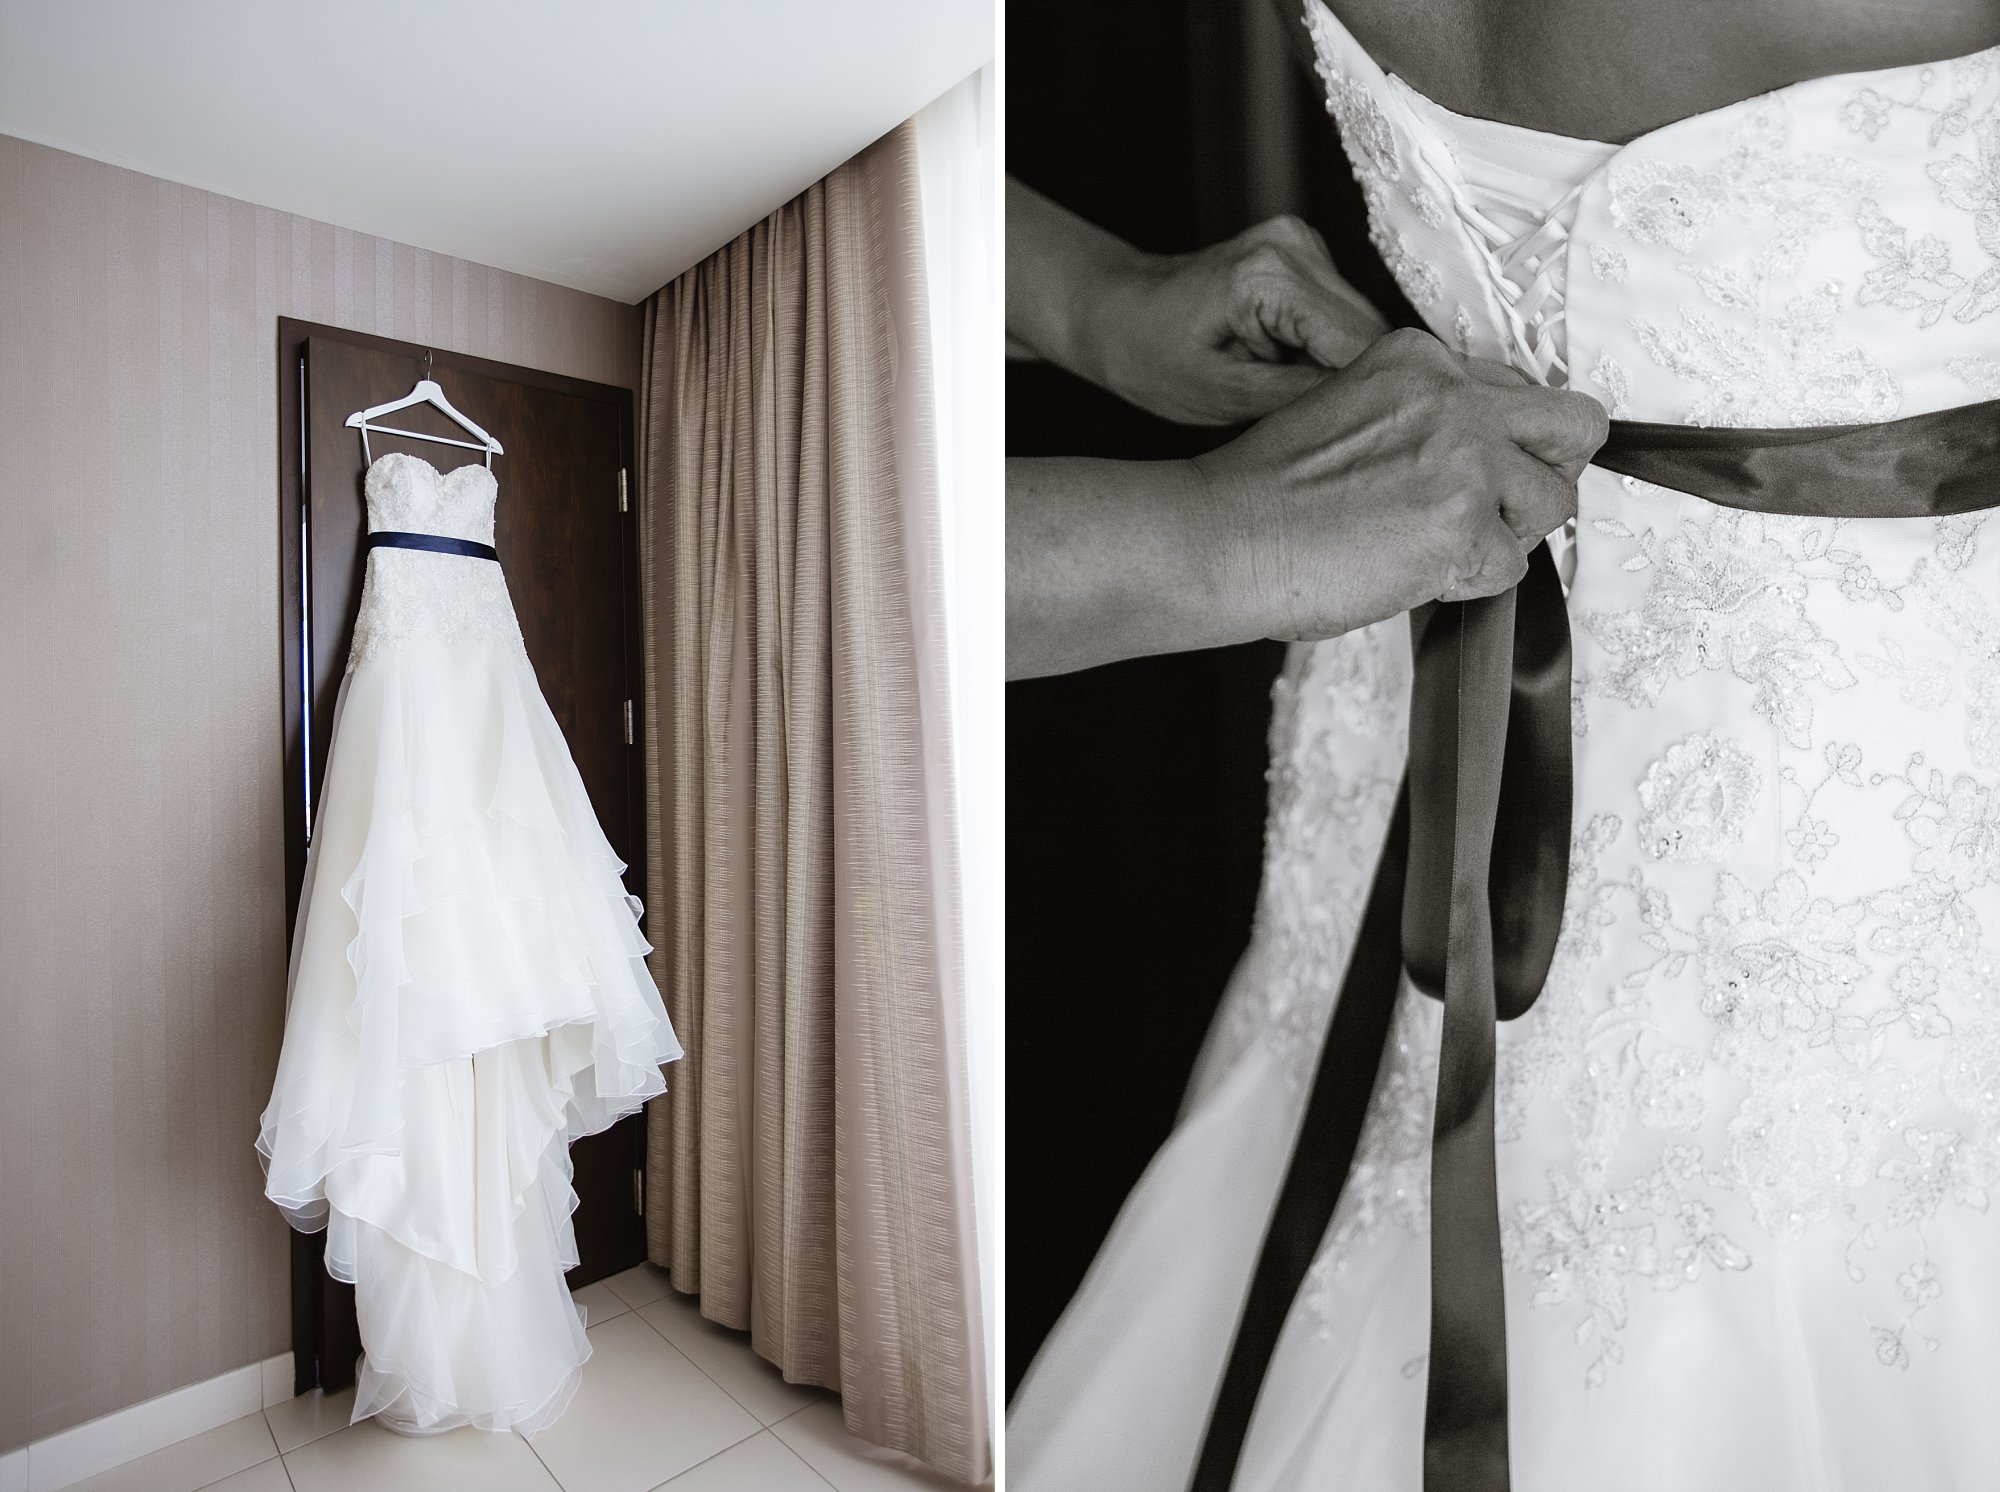 Image of brides dress hanging in hotel room paired with a black and white image of the brides mother tying her sash by wedding photographer PMA Photography.